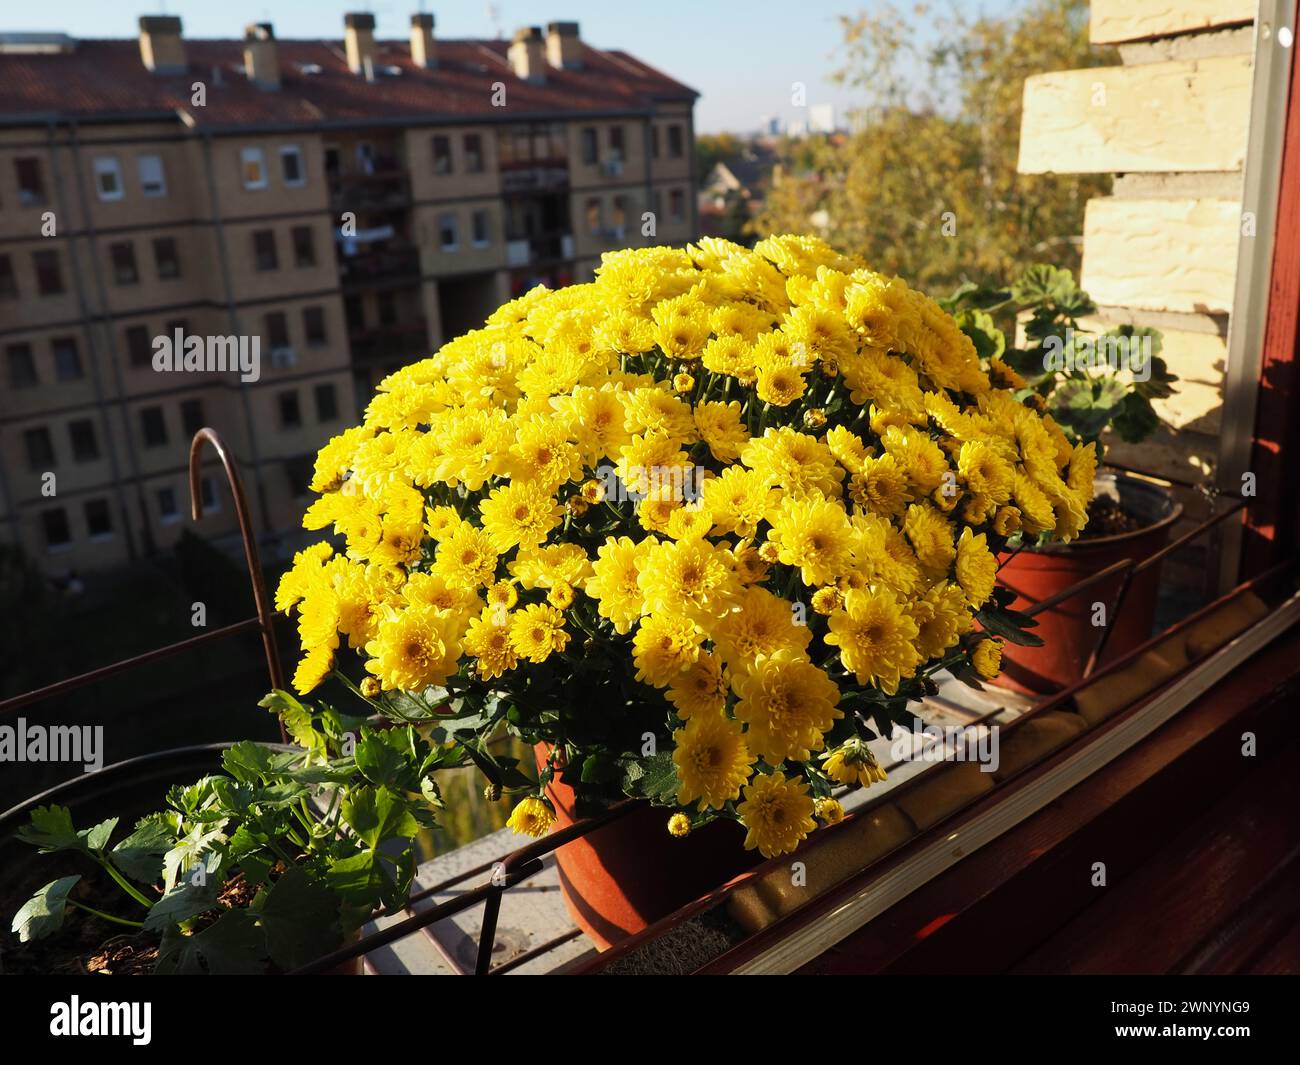 Yellow chrysanthemums, pots of geraniums and celery on the windowsill outside the window. Growing flowers on the balcony and windowsill. Indoor Stock Photo